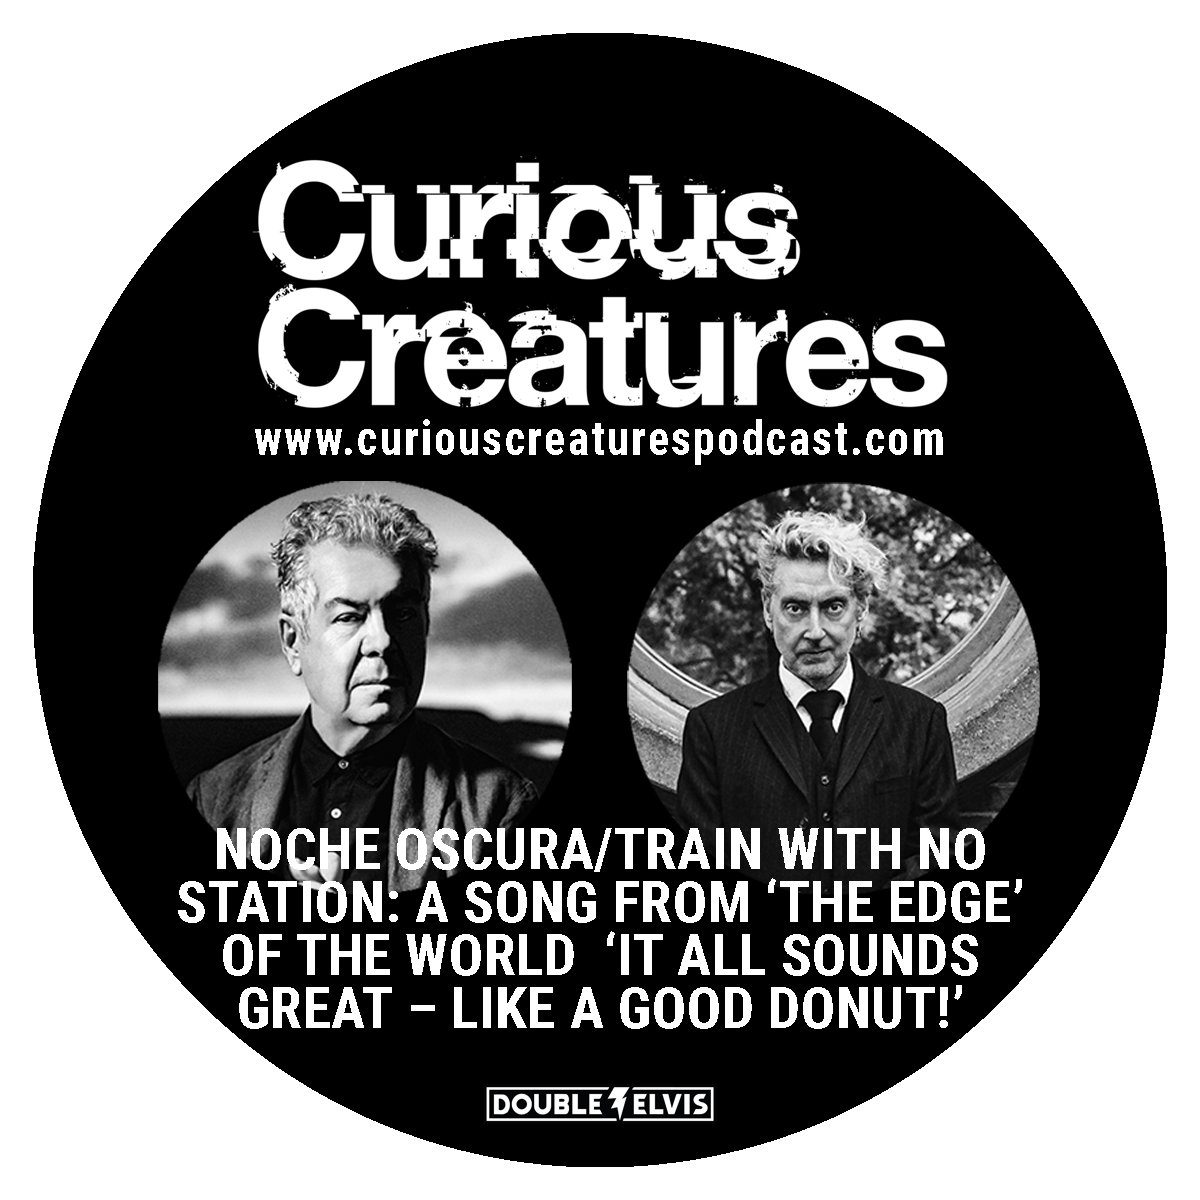 Find this week's new @curecreatures episode - Noche Oscura/Train with No Station: A Song from ‘The Edge’ of The World ‘It All Sounds Great – Like a Good Donut!’ - wherever you get your podcasts